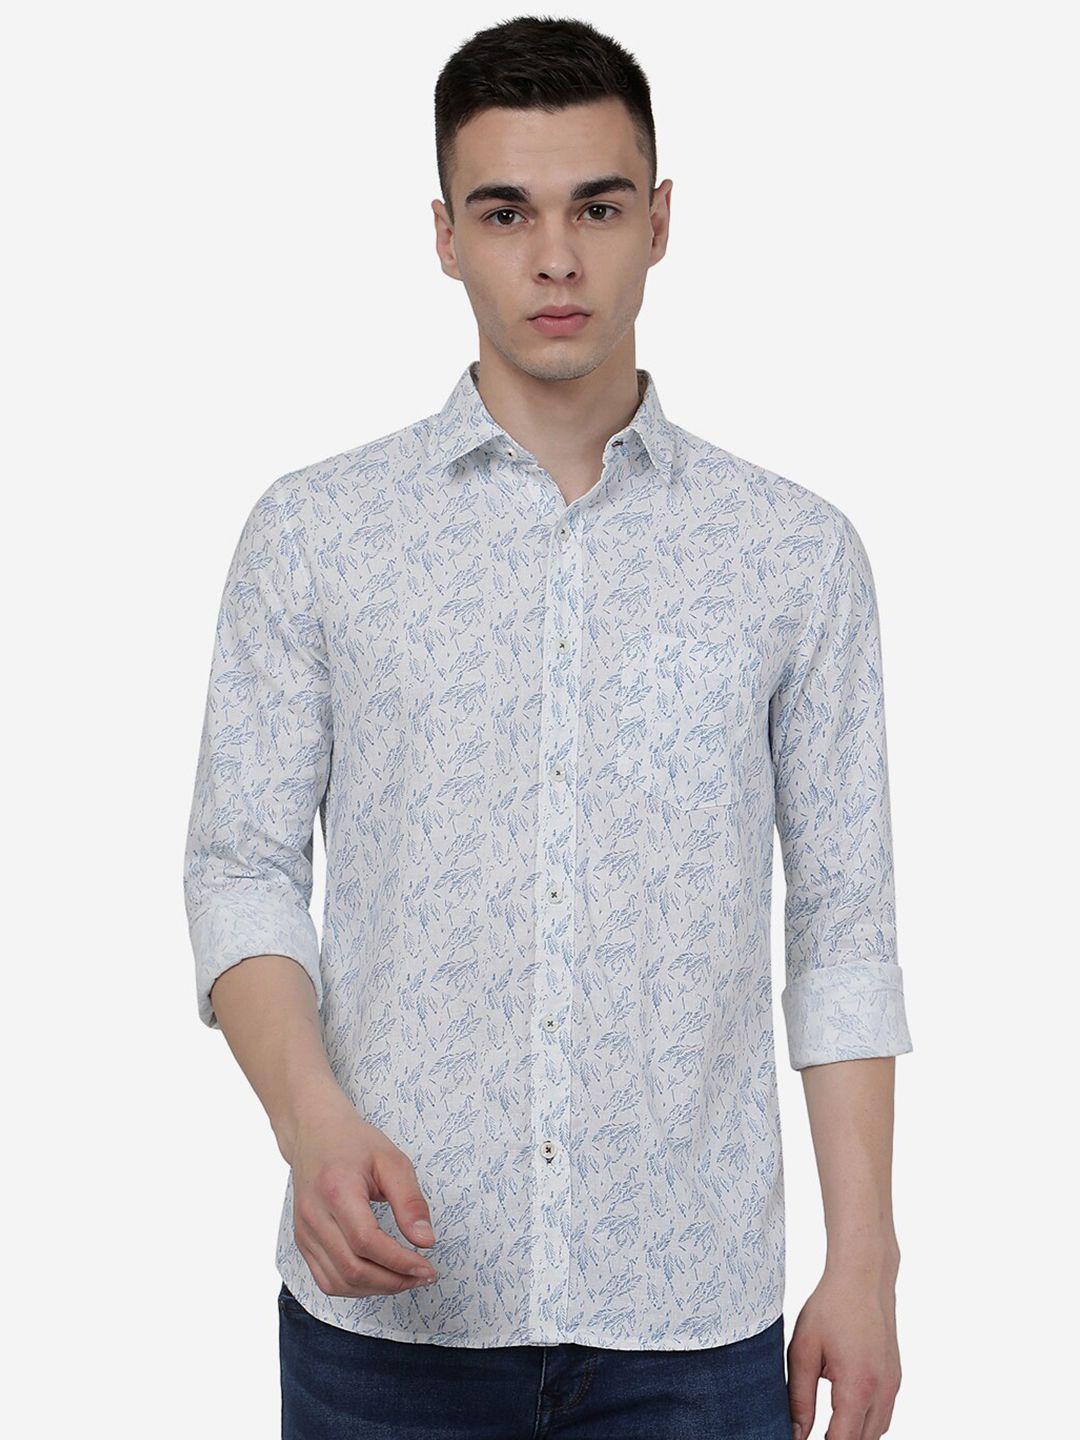 jade blue floral printed spread collar casual pure cotton shirt